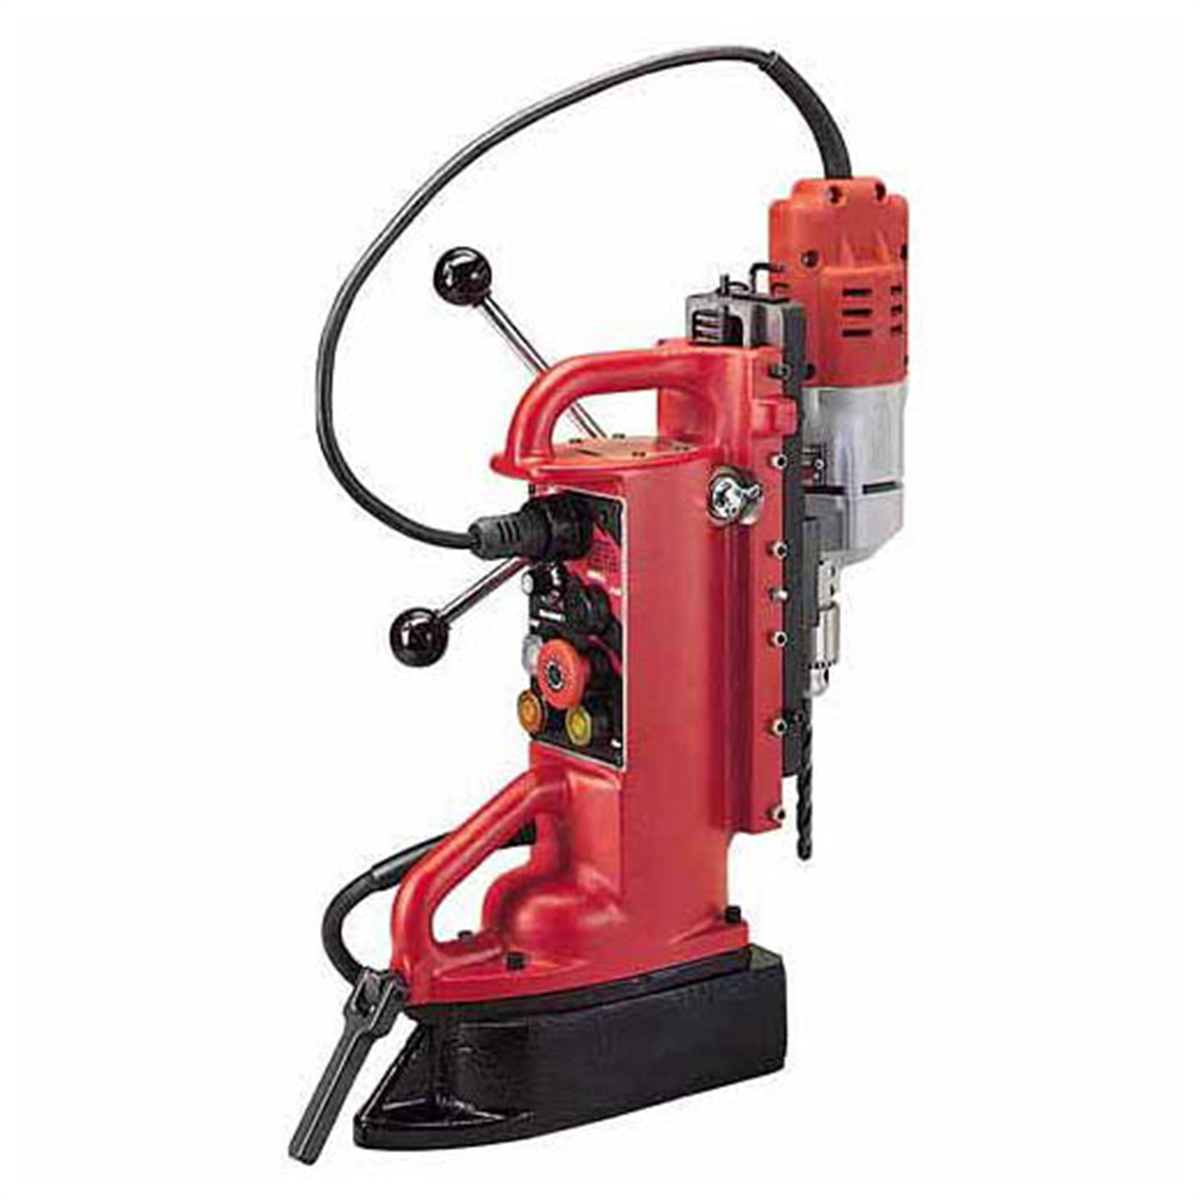 Adjustable Position Electromagnetic Drill Press with 1/2 in. Mot